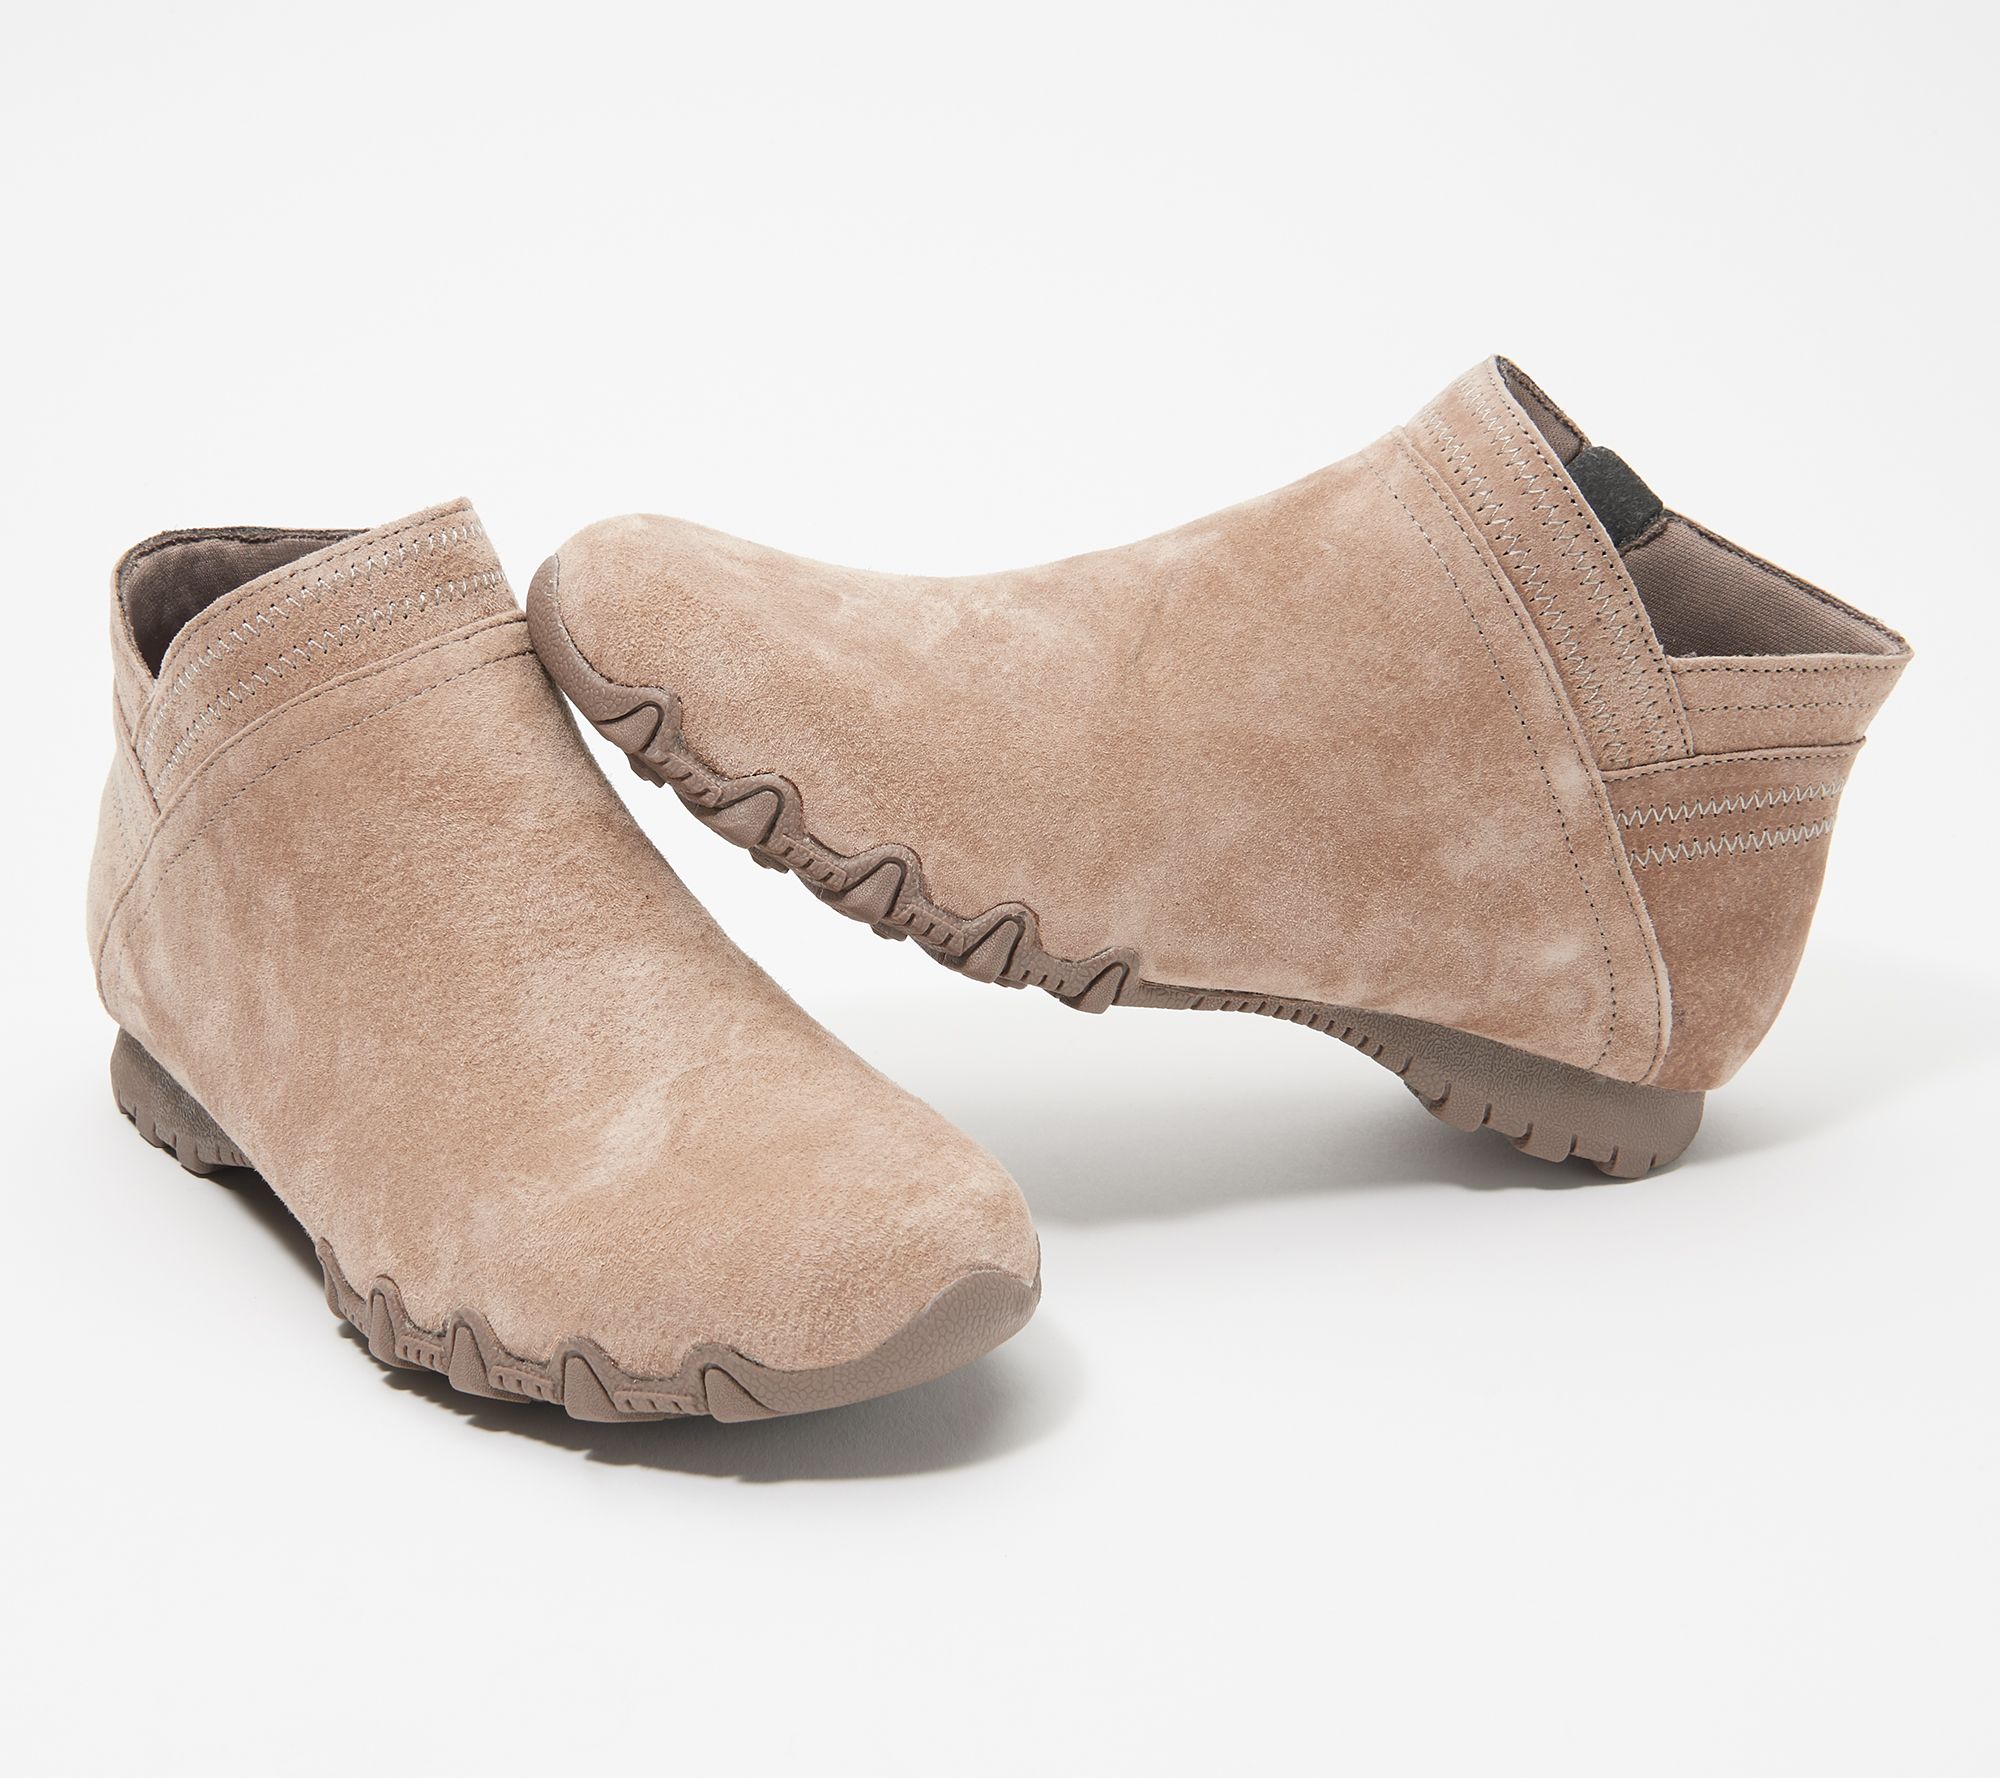 skechers suede leather boots